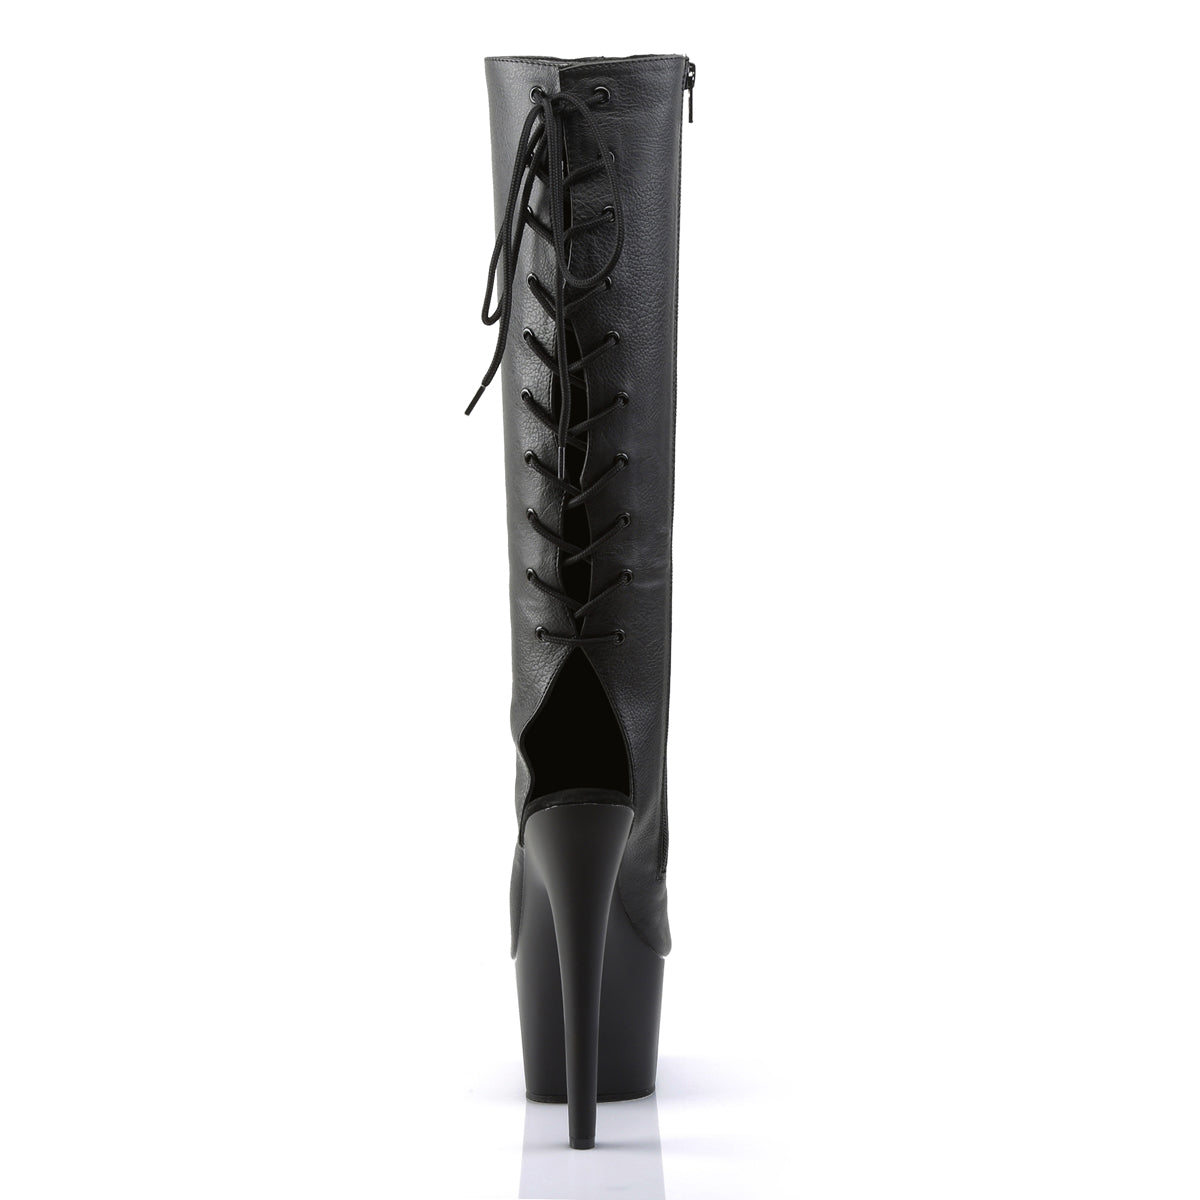 ADORE-2018 Black Faux Leather Knee Boot Pleaser